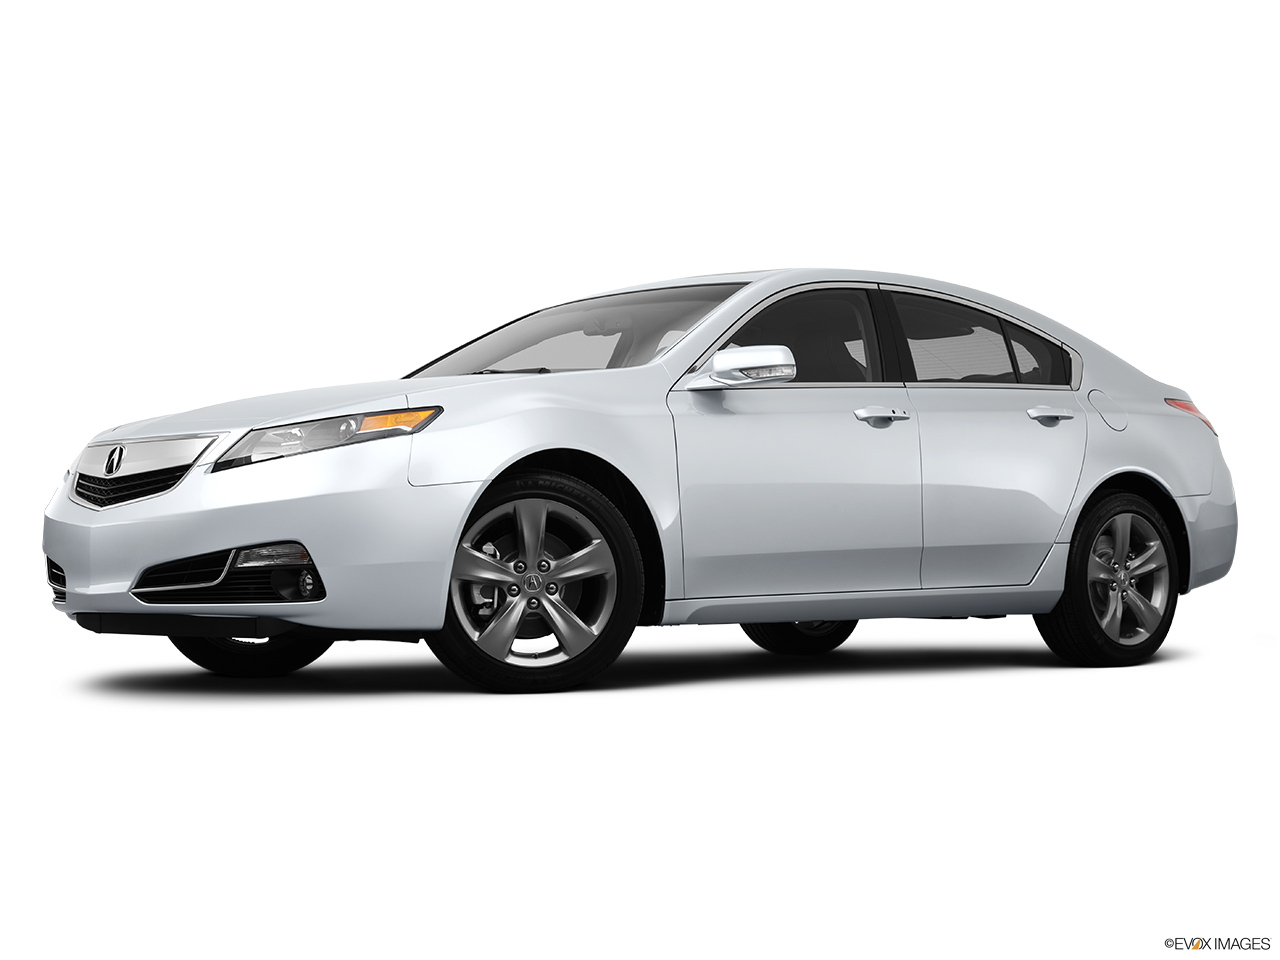 2013 Acura TL SH-AWD Low/wide front 5/8. 